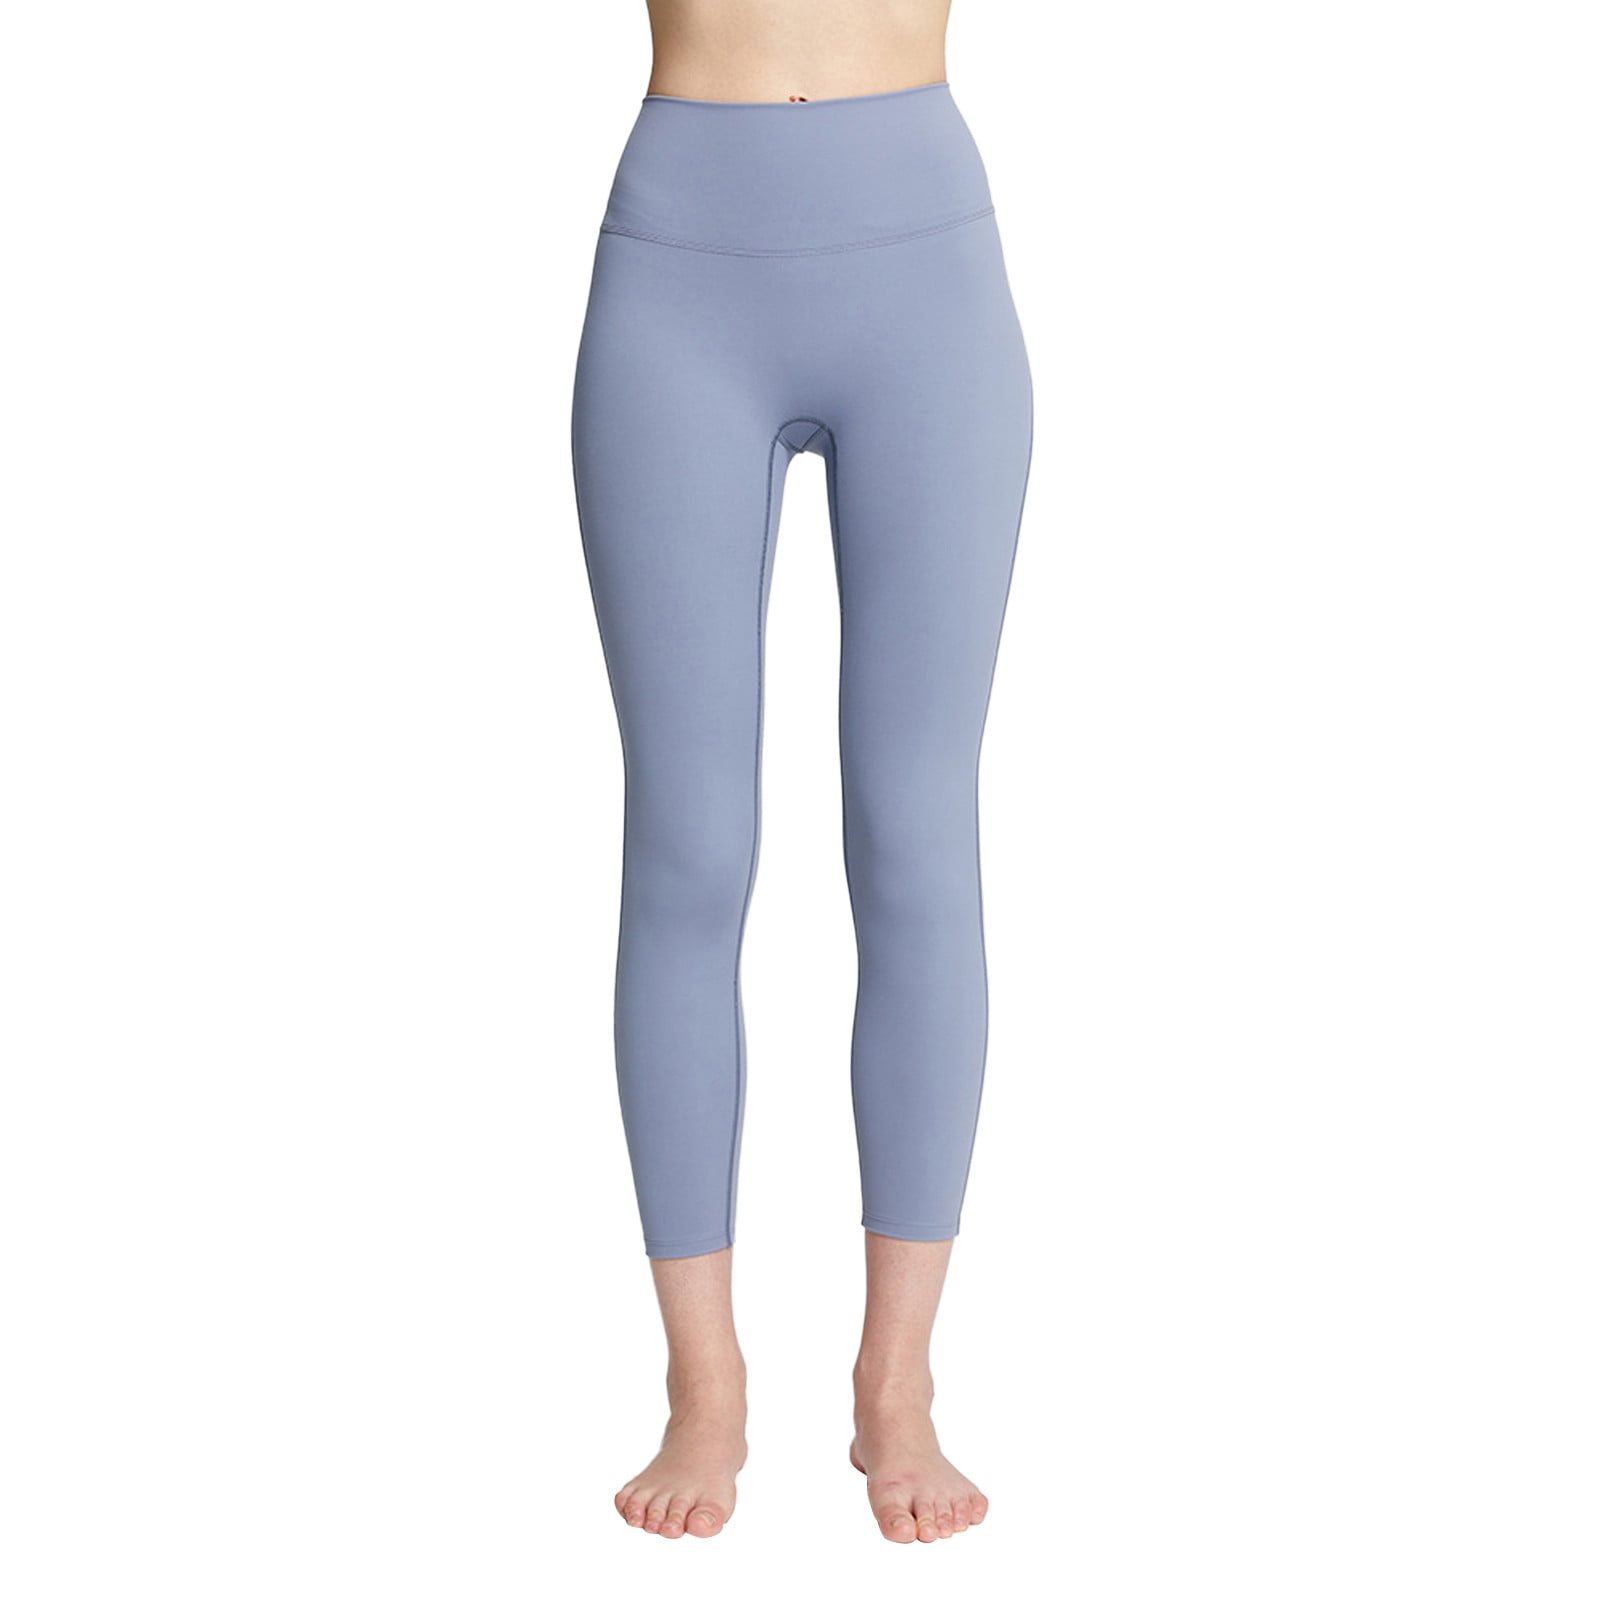 Women Casual Coloured Yoga Sports,Sexy Body Shaping High Waist Breasted  ,Ladies Hip Lifting Leggings,Female Soft Lounge Workout Running Butt Lift  Pant